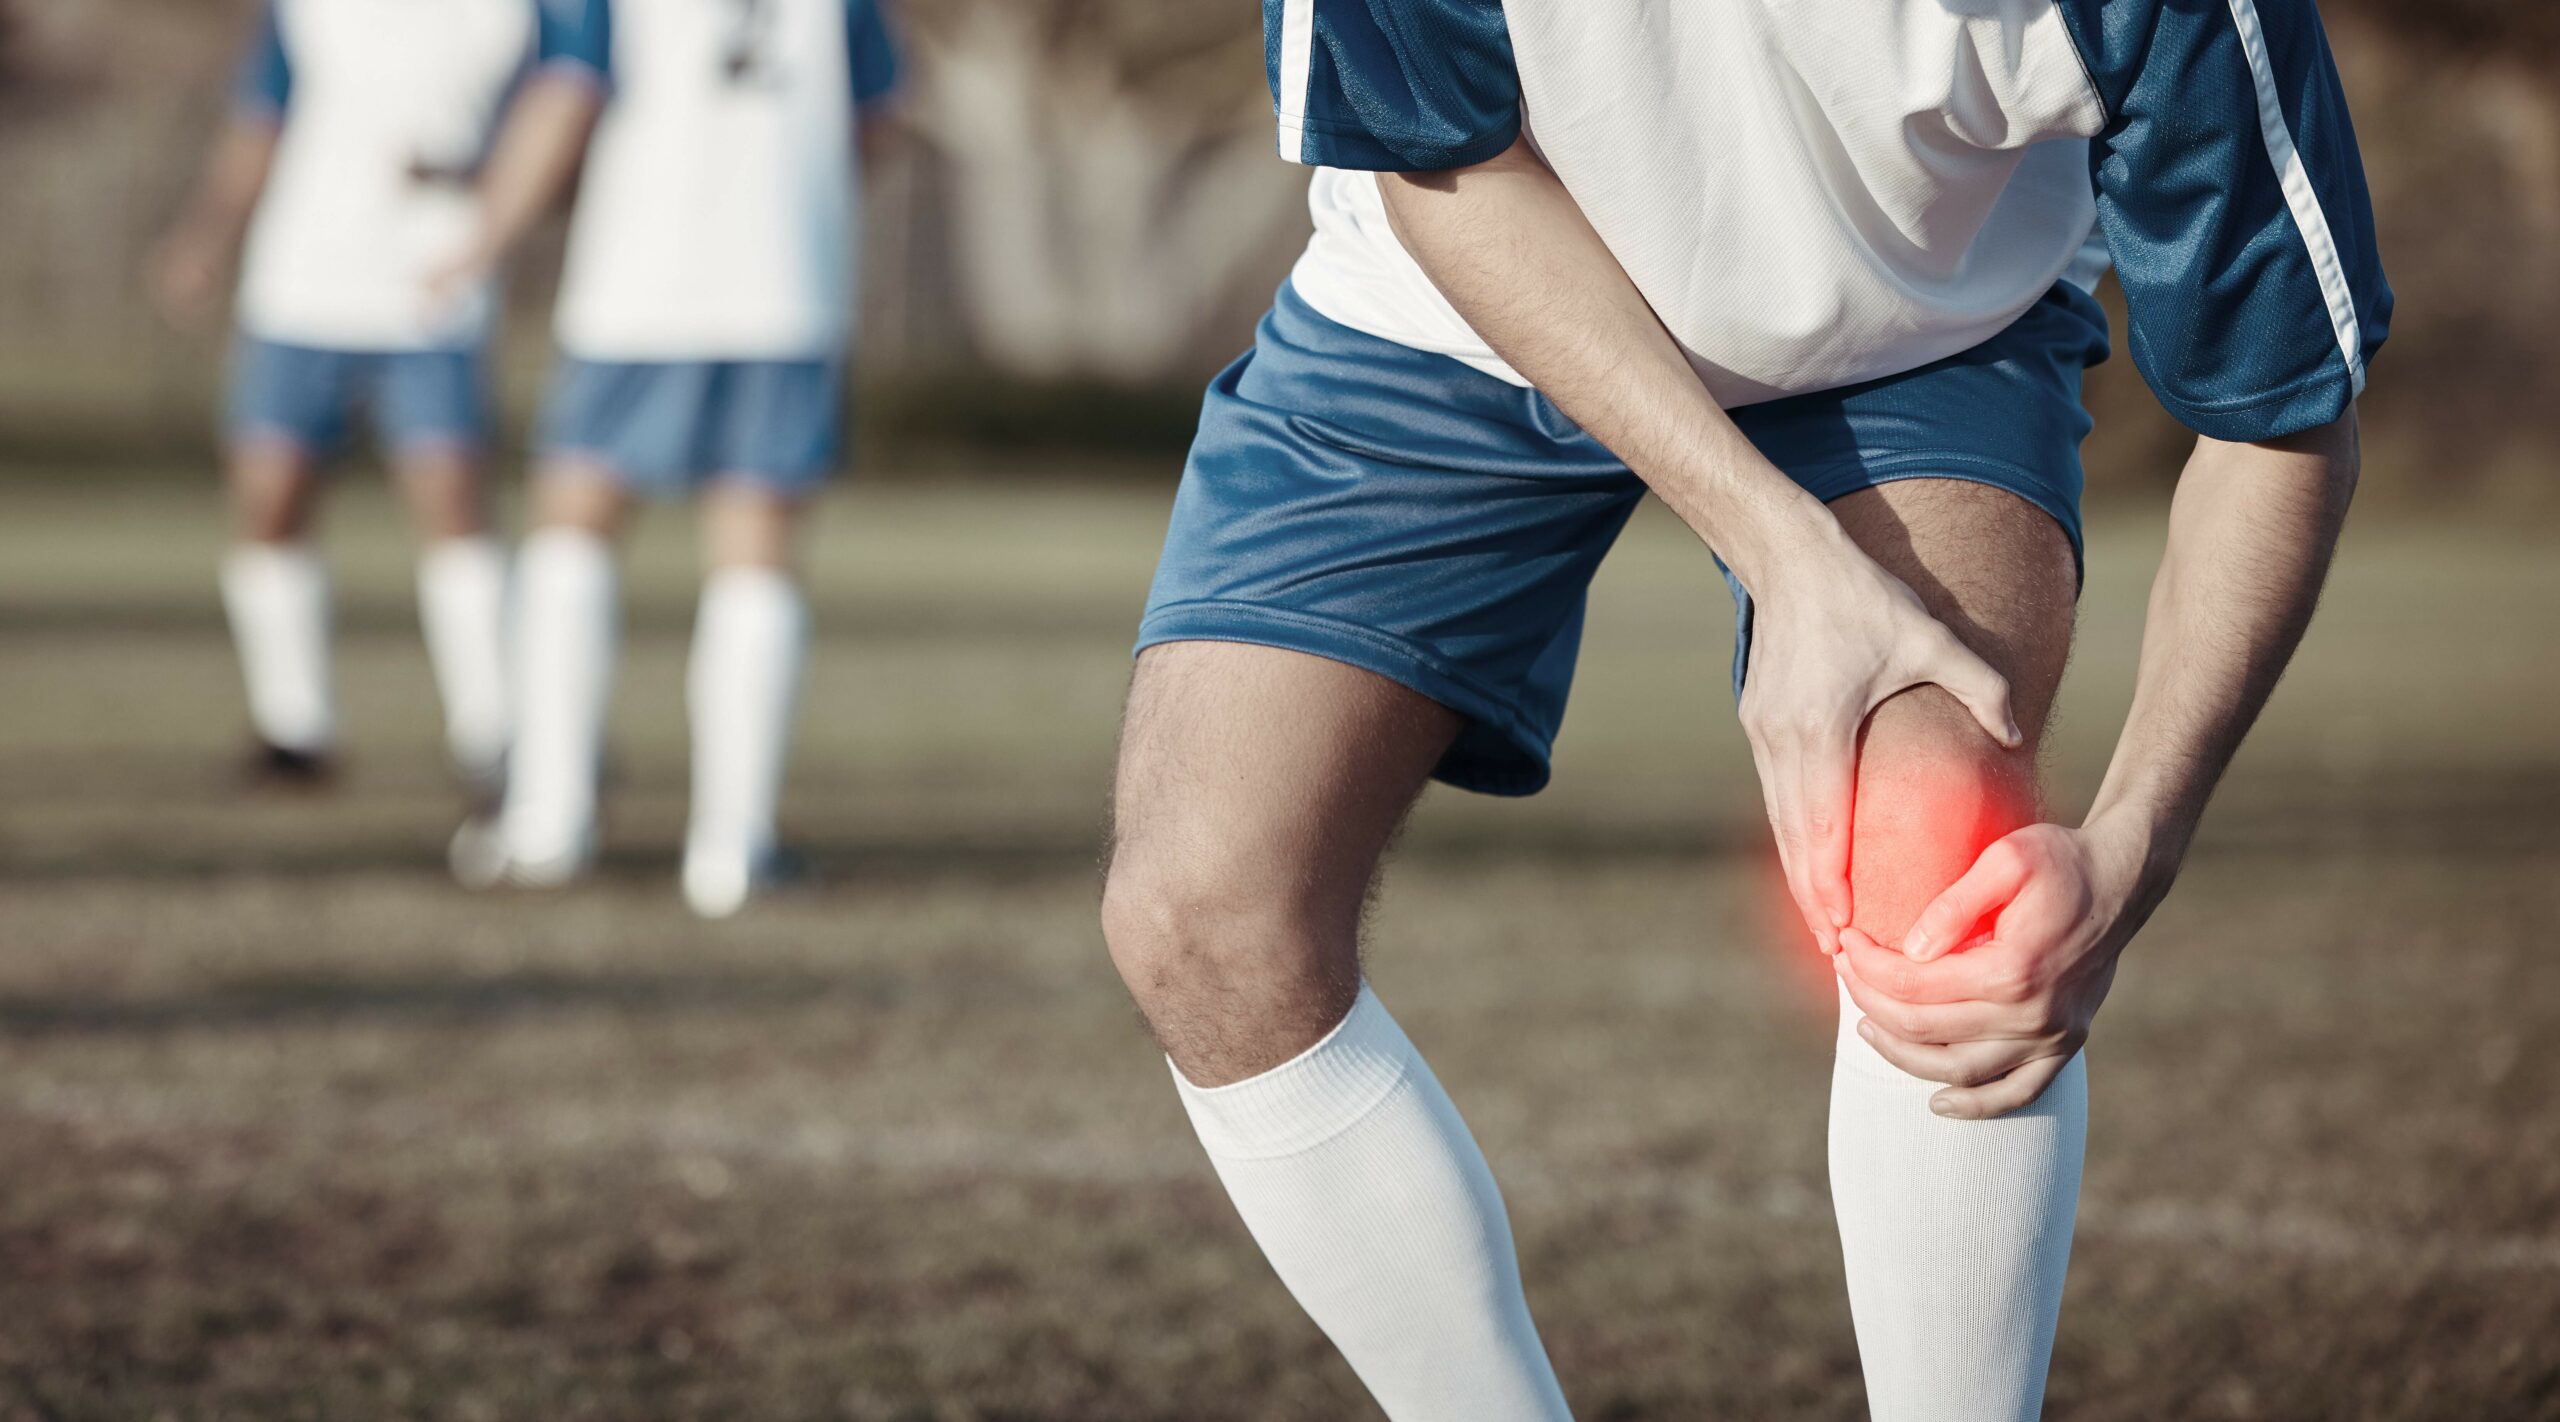 Soccer Player with Inflamed Knee